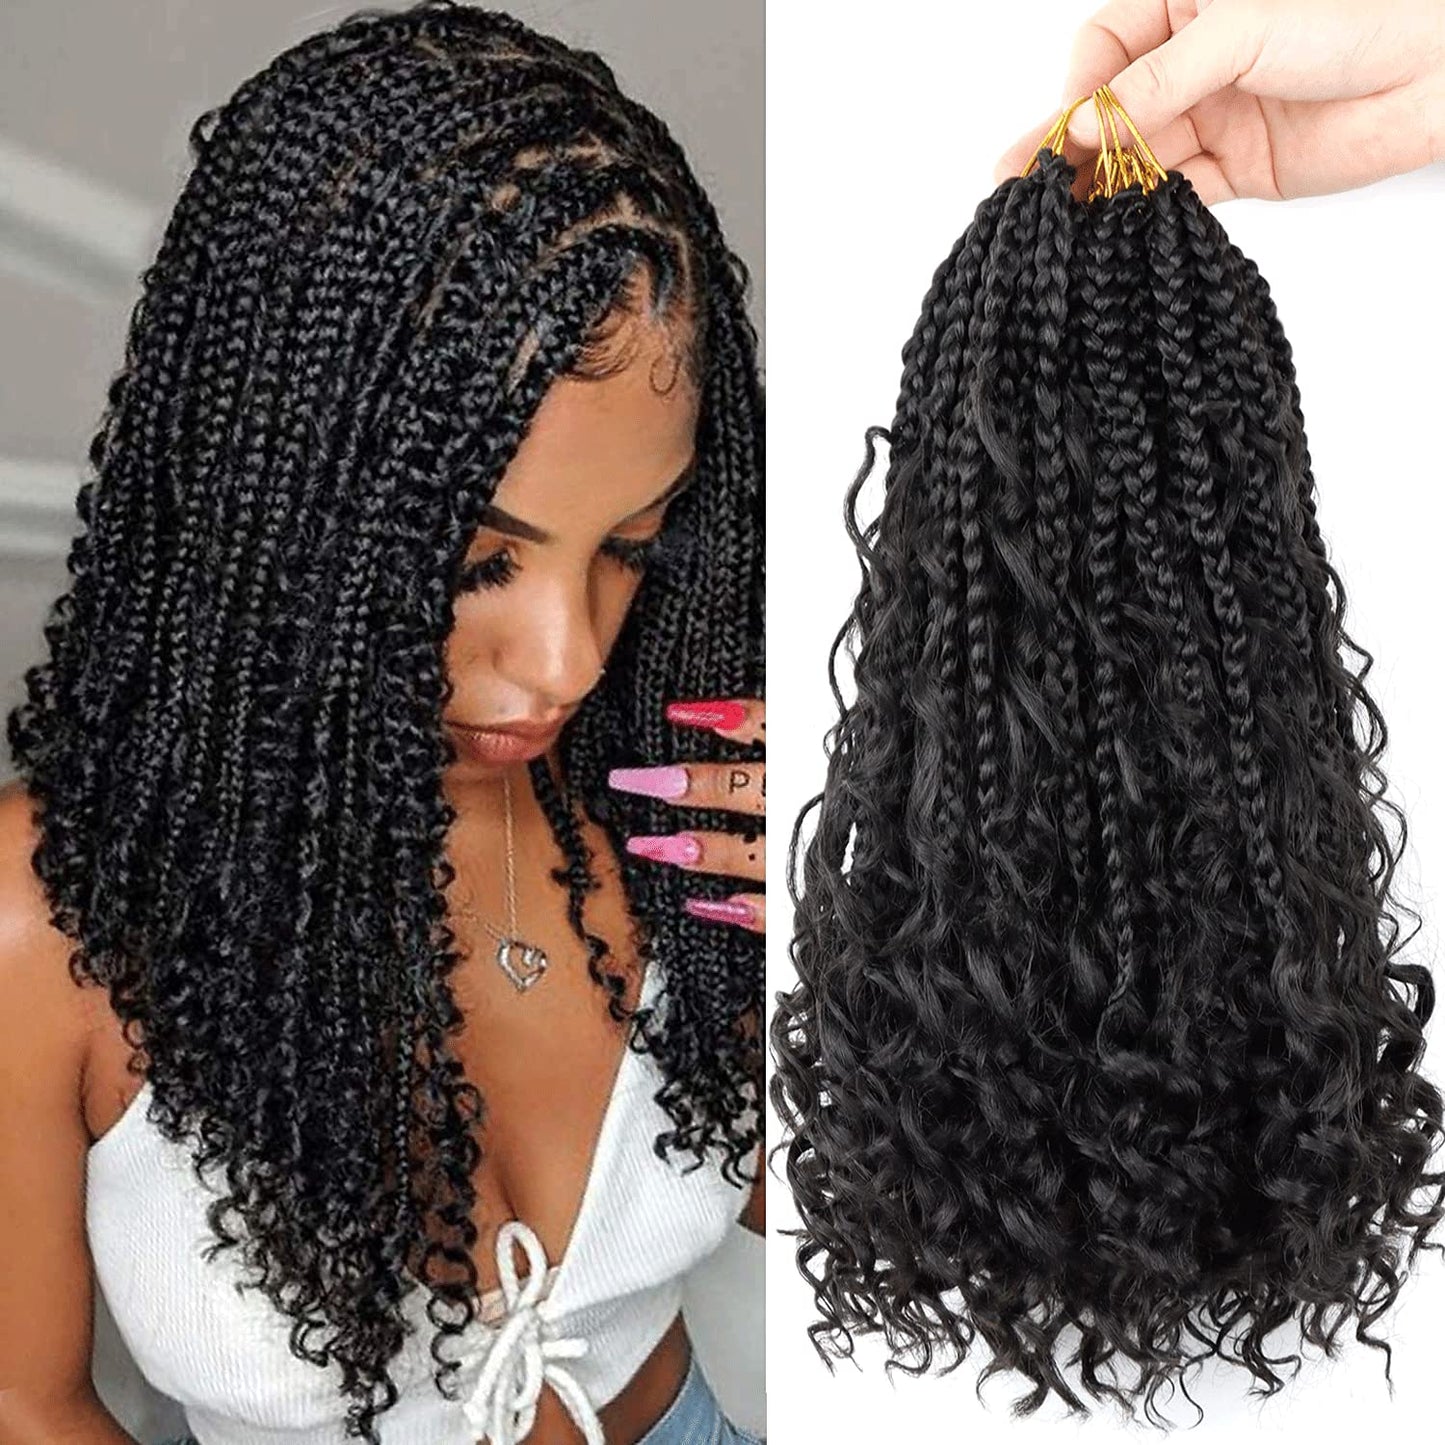 6 Packs Crochet Box Braids Curly Ends 10Inch Short Indonesia